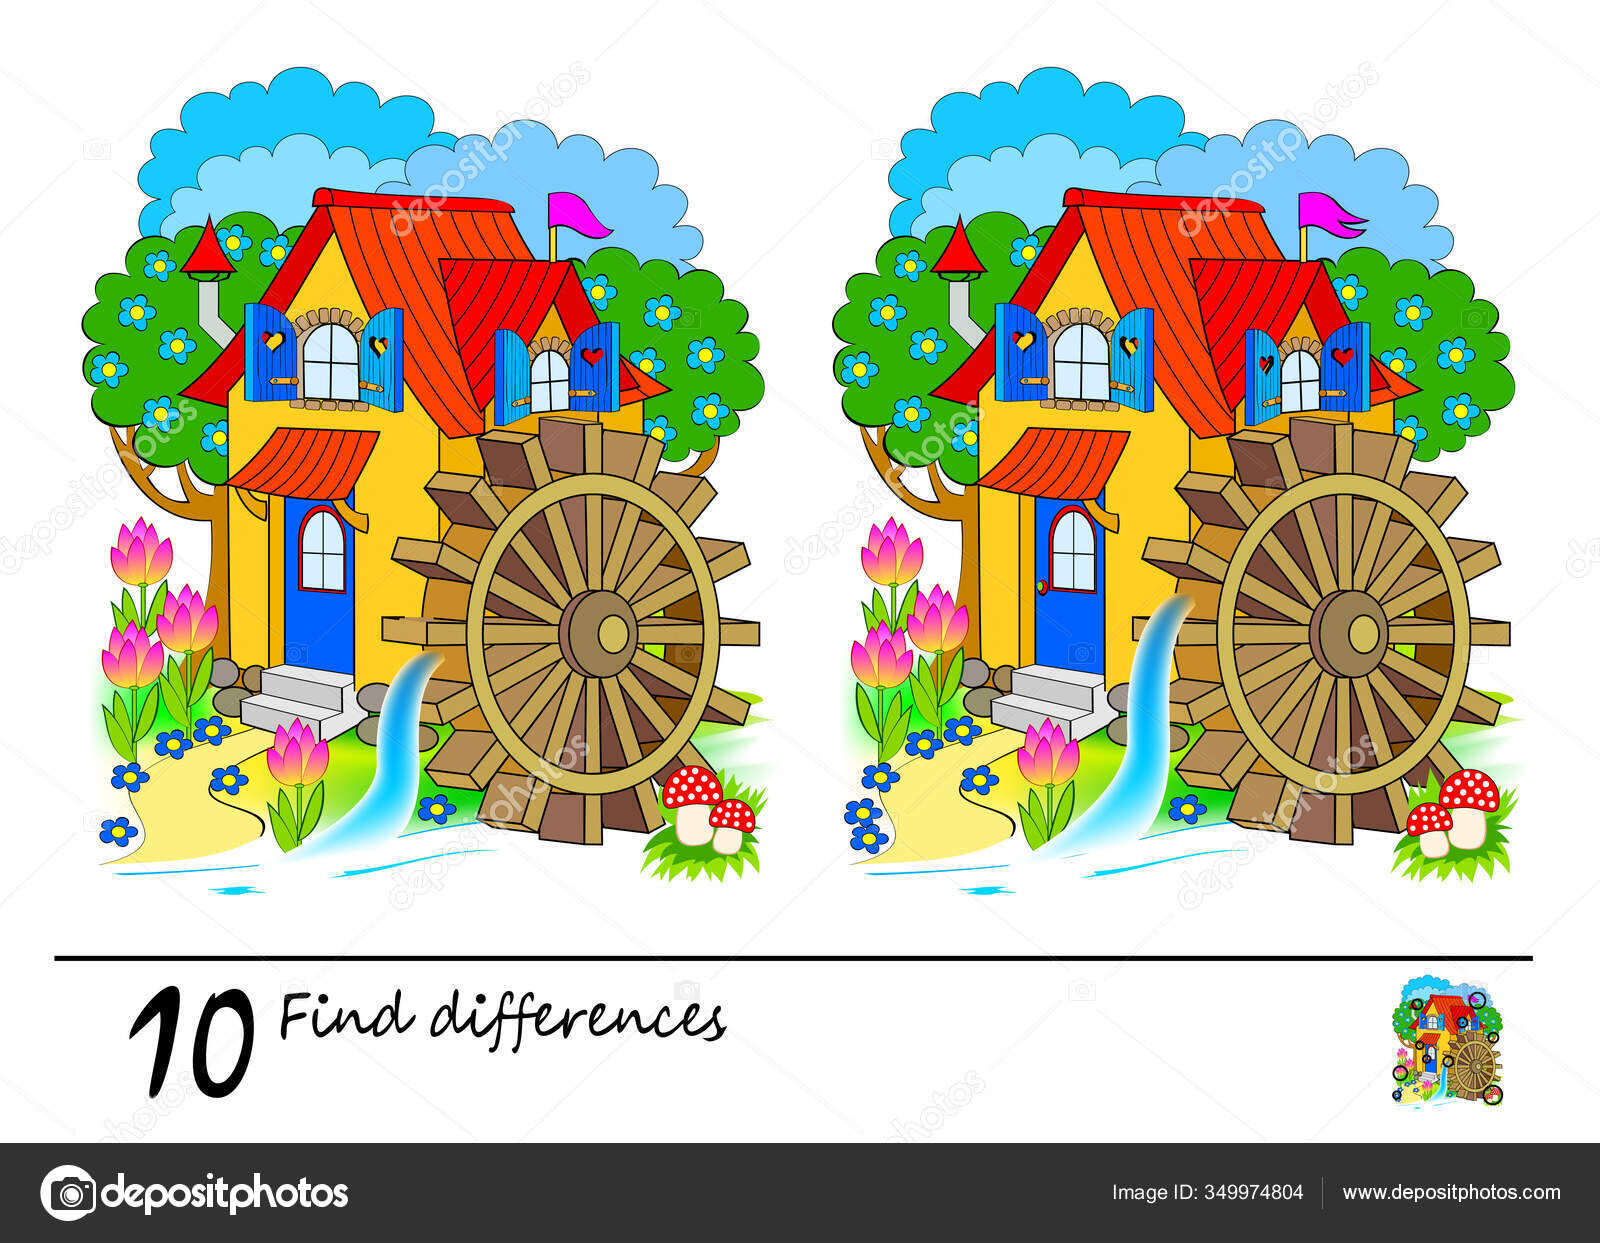 Find Differences Logic Puzzle Game Children Adults Printable Page